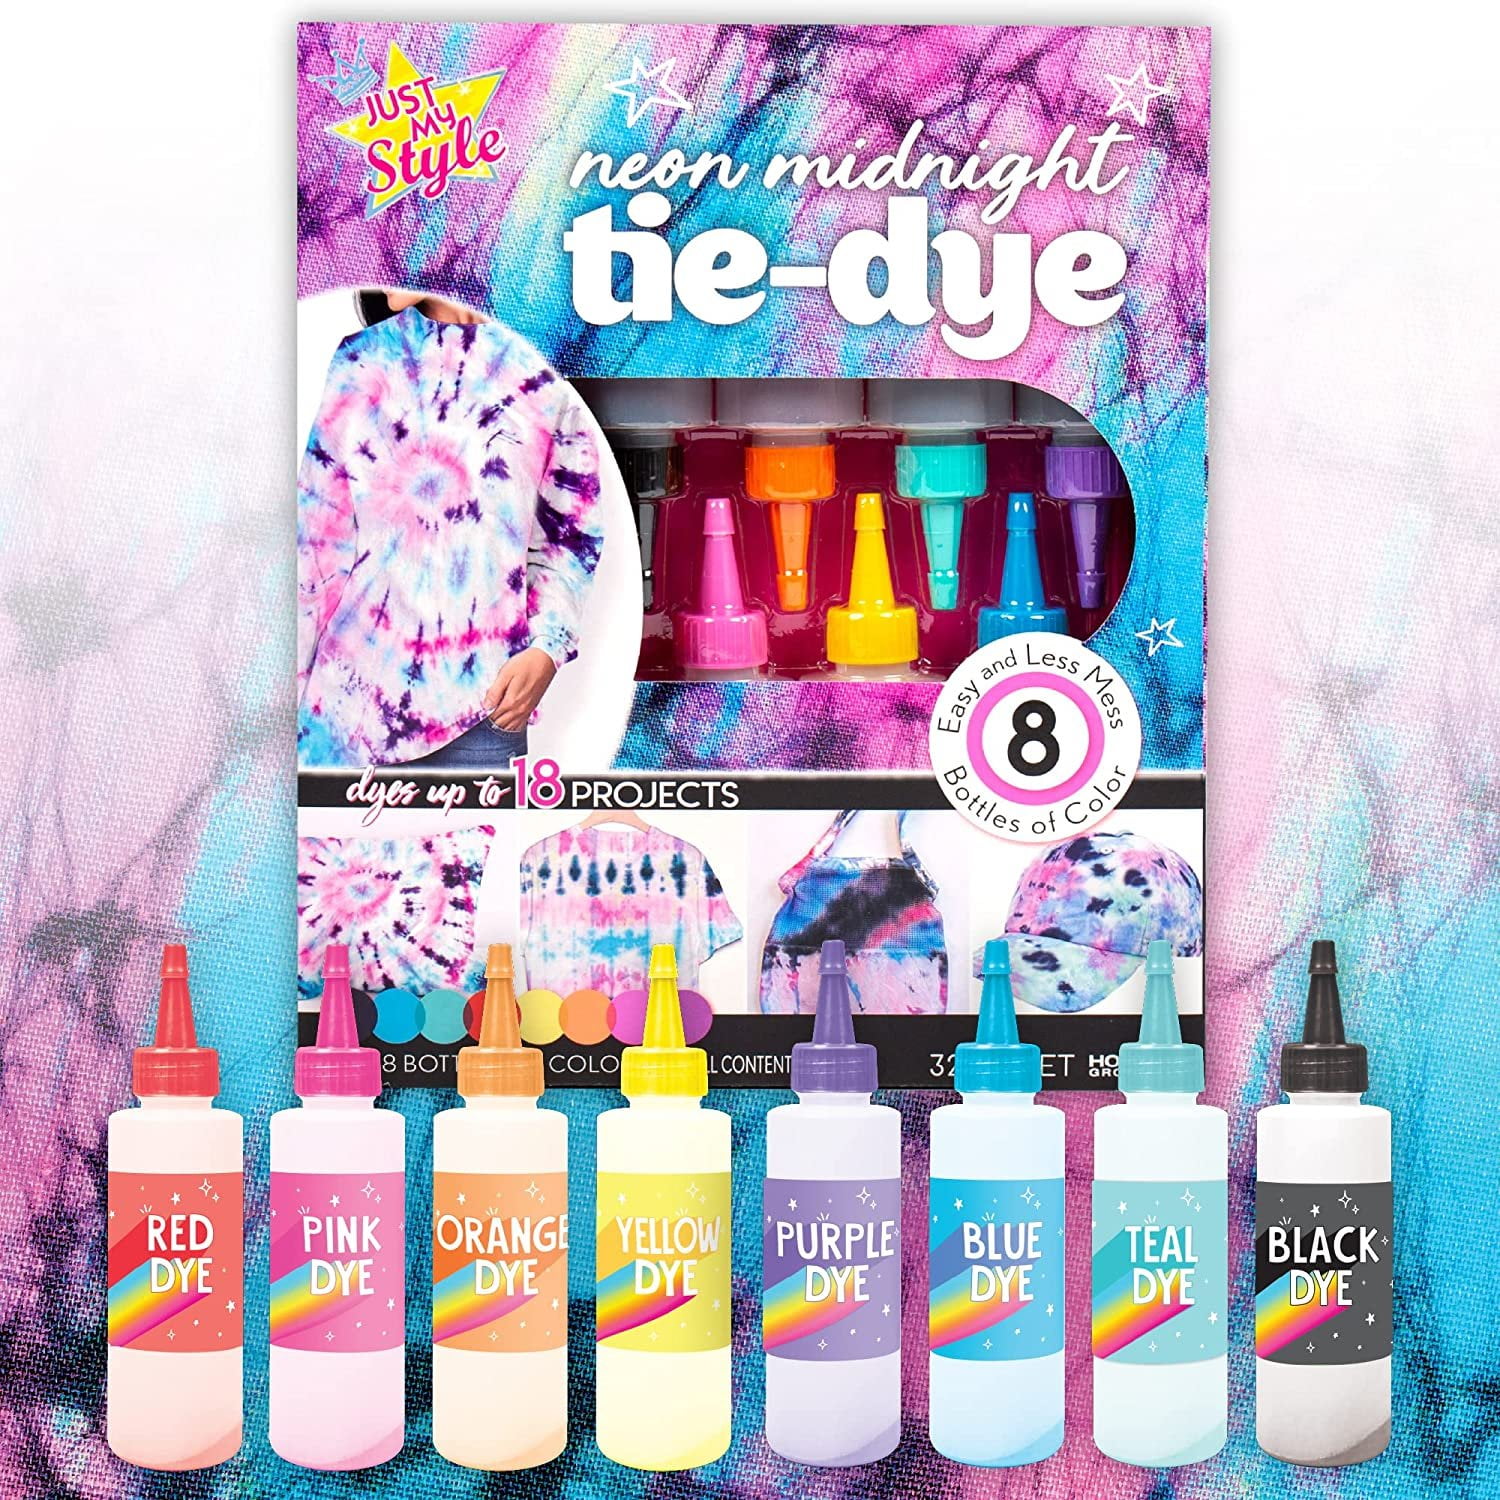 Just My Style Neon Midnight Tie-Dye DIY Tie Dye Kit Create Up to 18 Tie Dye Accessories Great Tie Dye Craft Set Colorful Fabric Dyes, Gloves & Rubber